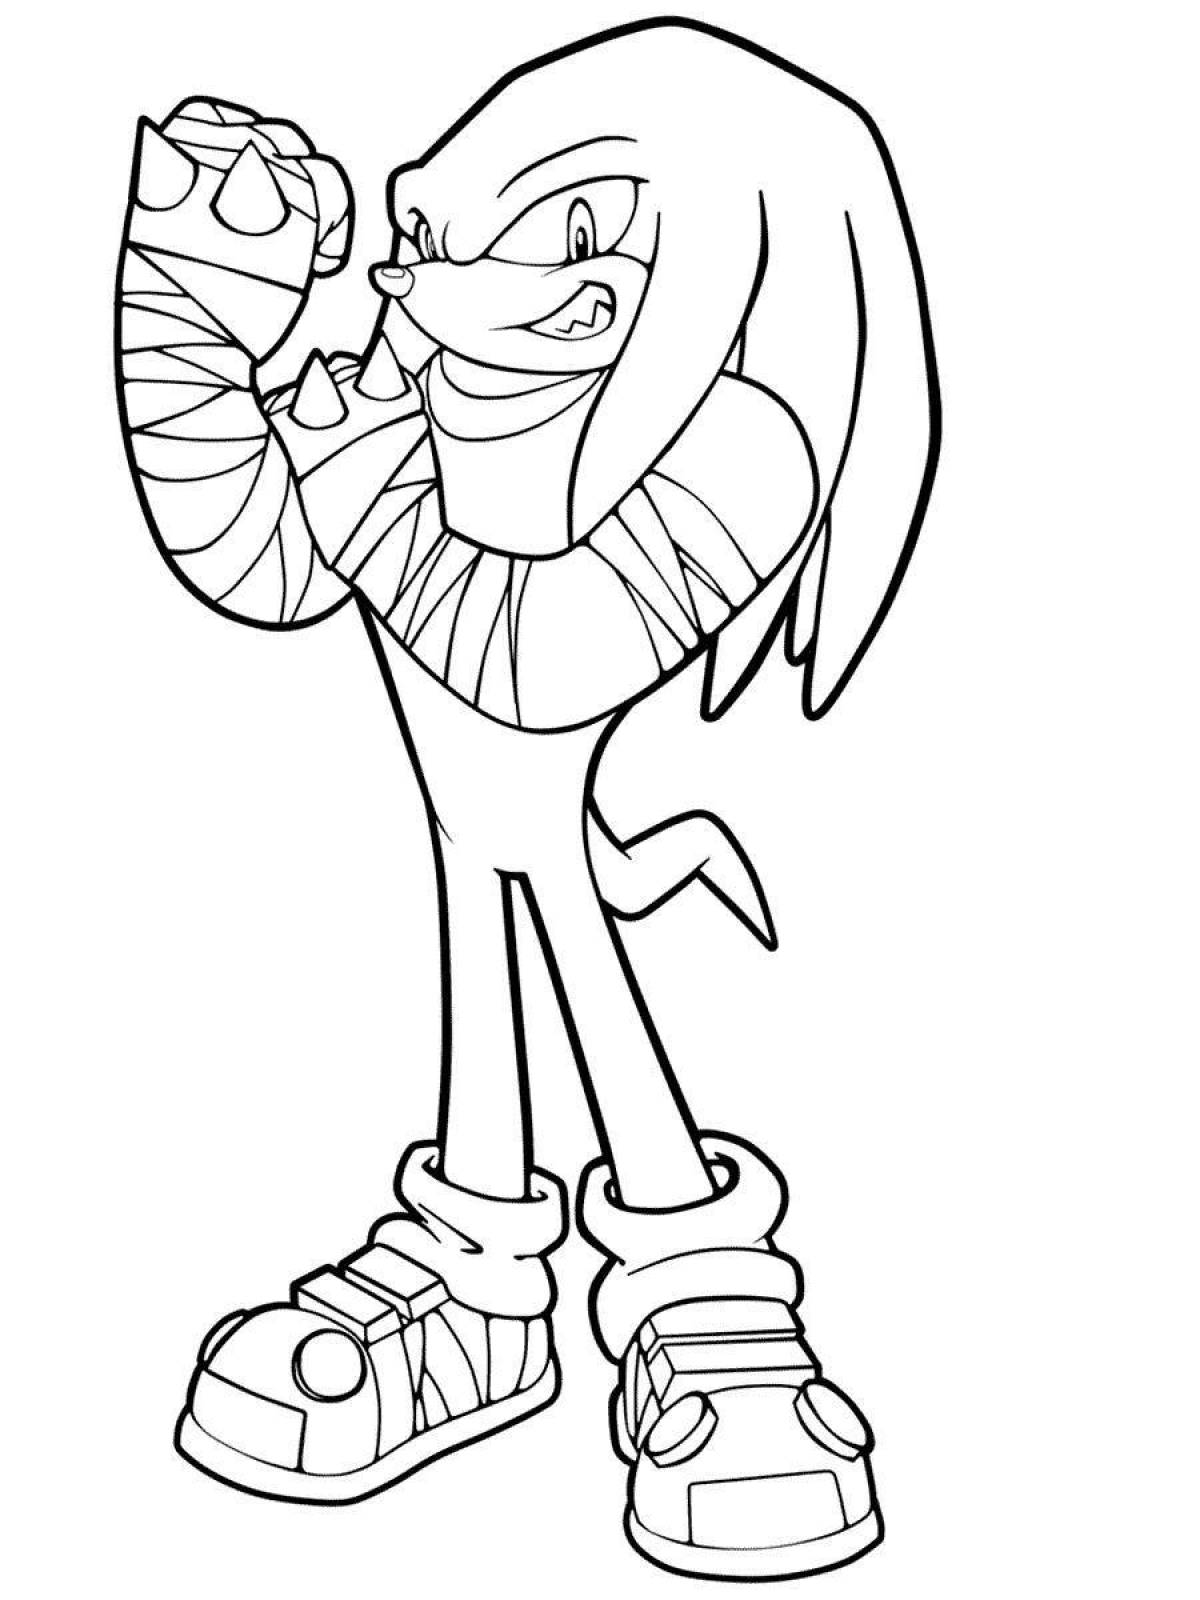 Fancy knuckles coloring book